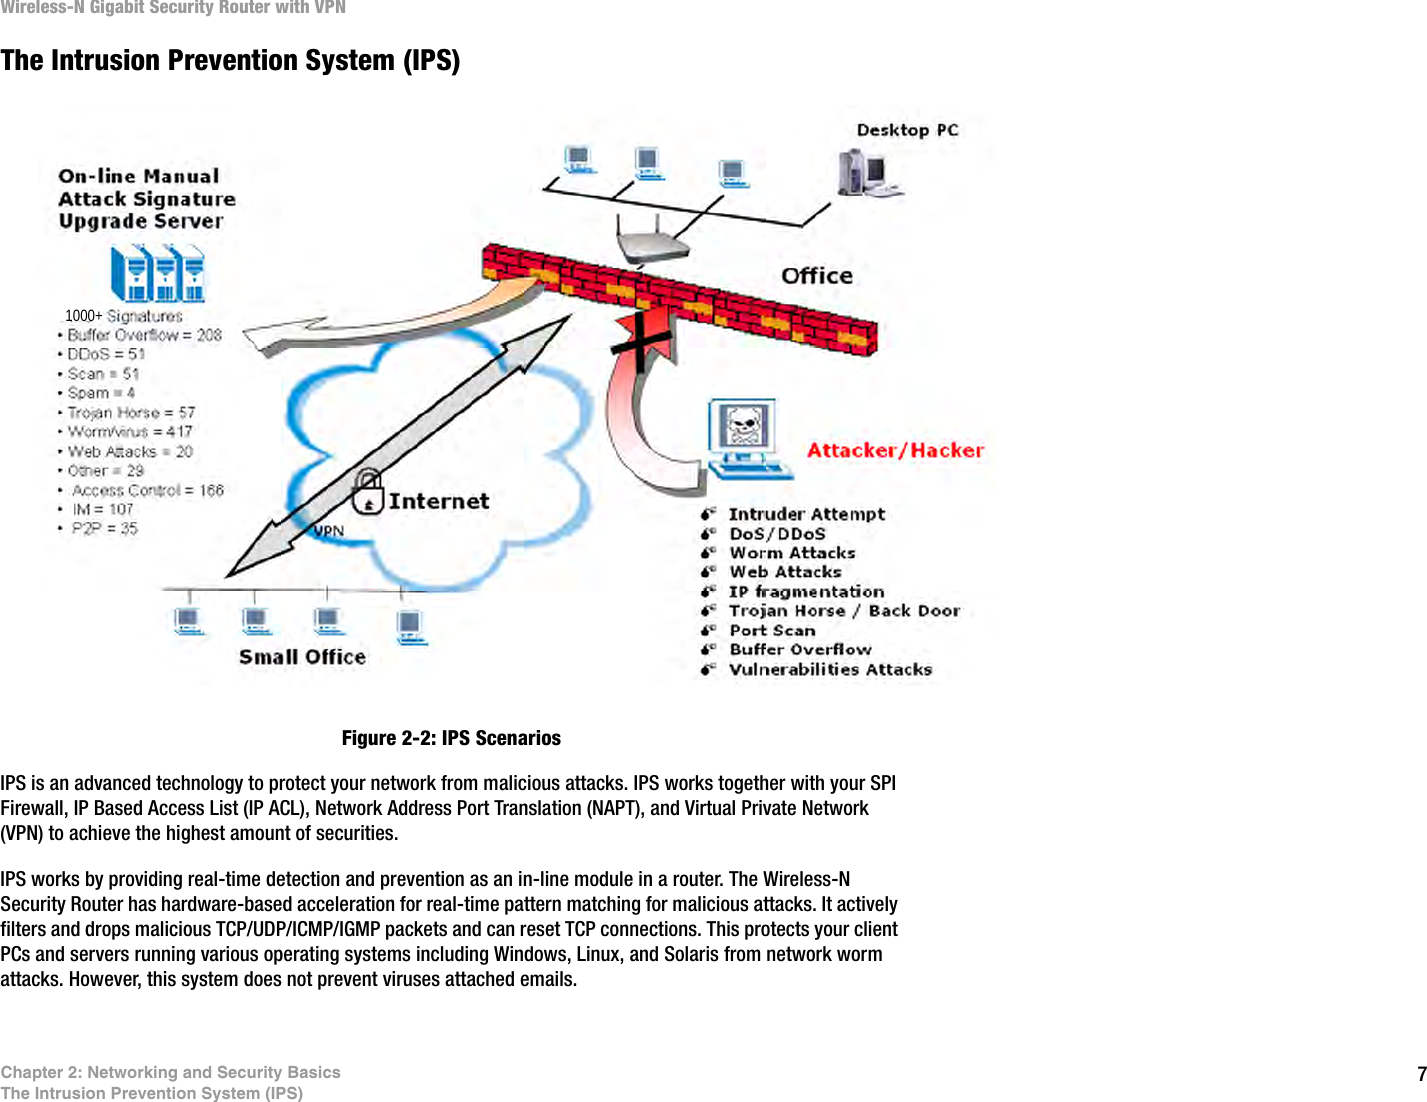 7Chapter 2: Networking and Security BasicsThe Intrusion Prevention System (IPS)Wireless-N Gigabit Security Router with VPNThe Intrusion Prevention System (IPS)Figure 2-2: IPS ScenariosIPS is an advanced technology to protect your network from malicious attacks. IPS works together with your SPI Firewall, IP Based Access List (IP ACL), Network Address Port Translation (NAPT), and Virtual Private Network (VPN) to achieve the highest amount of securities. IPS works by providing real-time detection and prevention as an in-line module in a router. The Wireless-N Security Router has hardware-based acceleration for real-time pattern matching for malicious attacks. It actively filters and drops malicious TCP/UDP/ICMP/IGMP packets and can reset TCP connections. This protects your client PCs and servers running various operating systems including Windows, Linux, and Solaris from network worm attacks. However, this system does not prevent viruses attached emails. 1000+